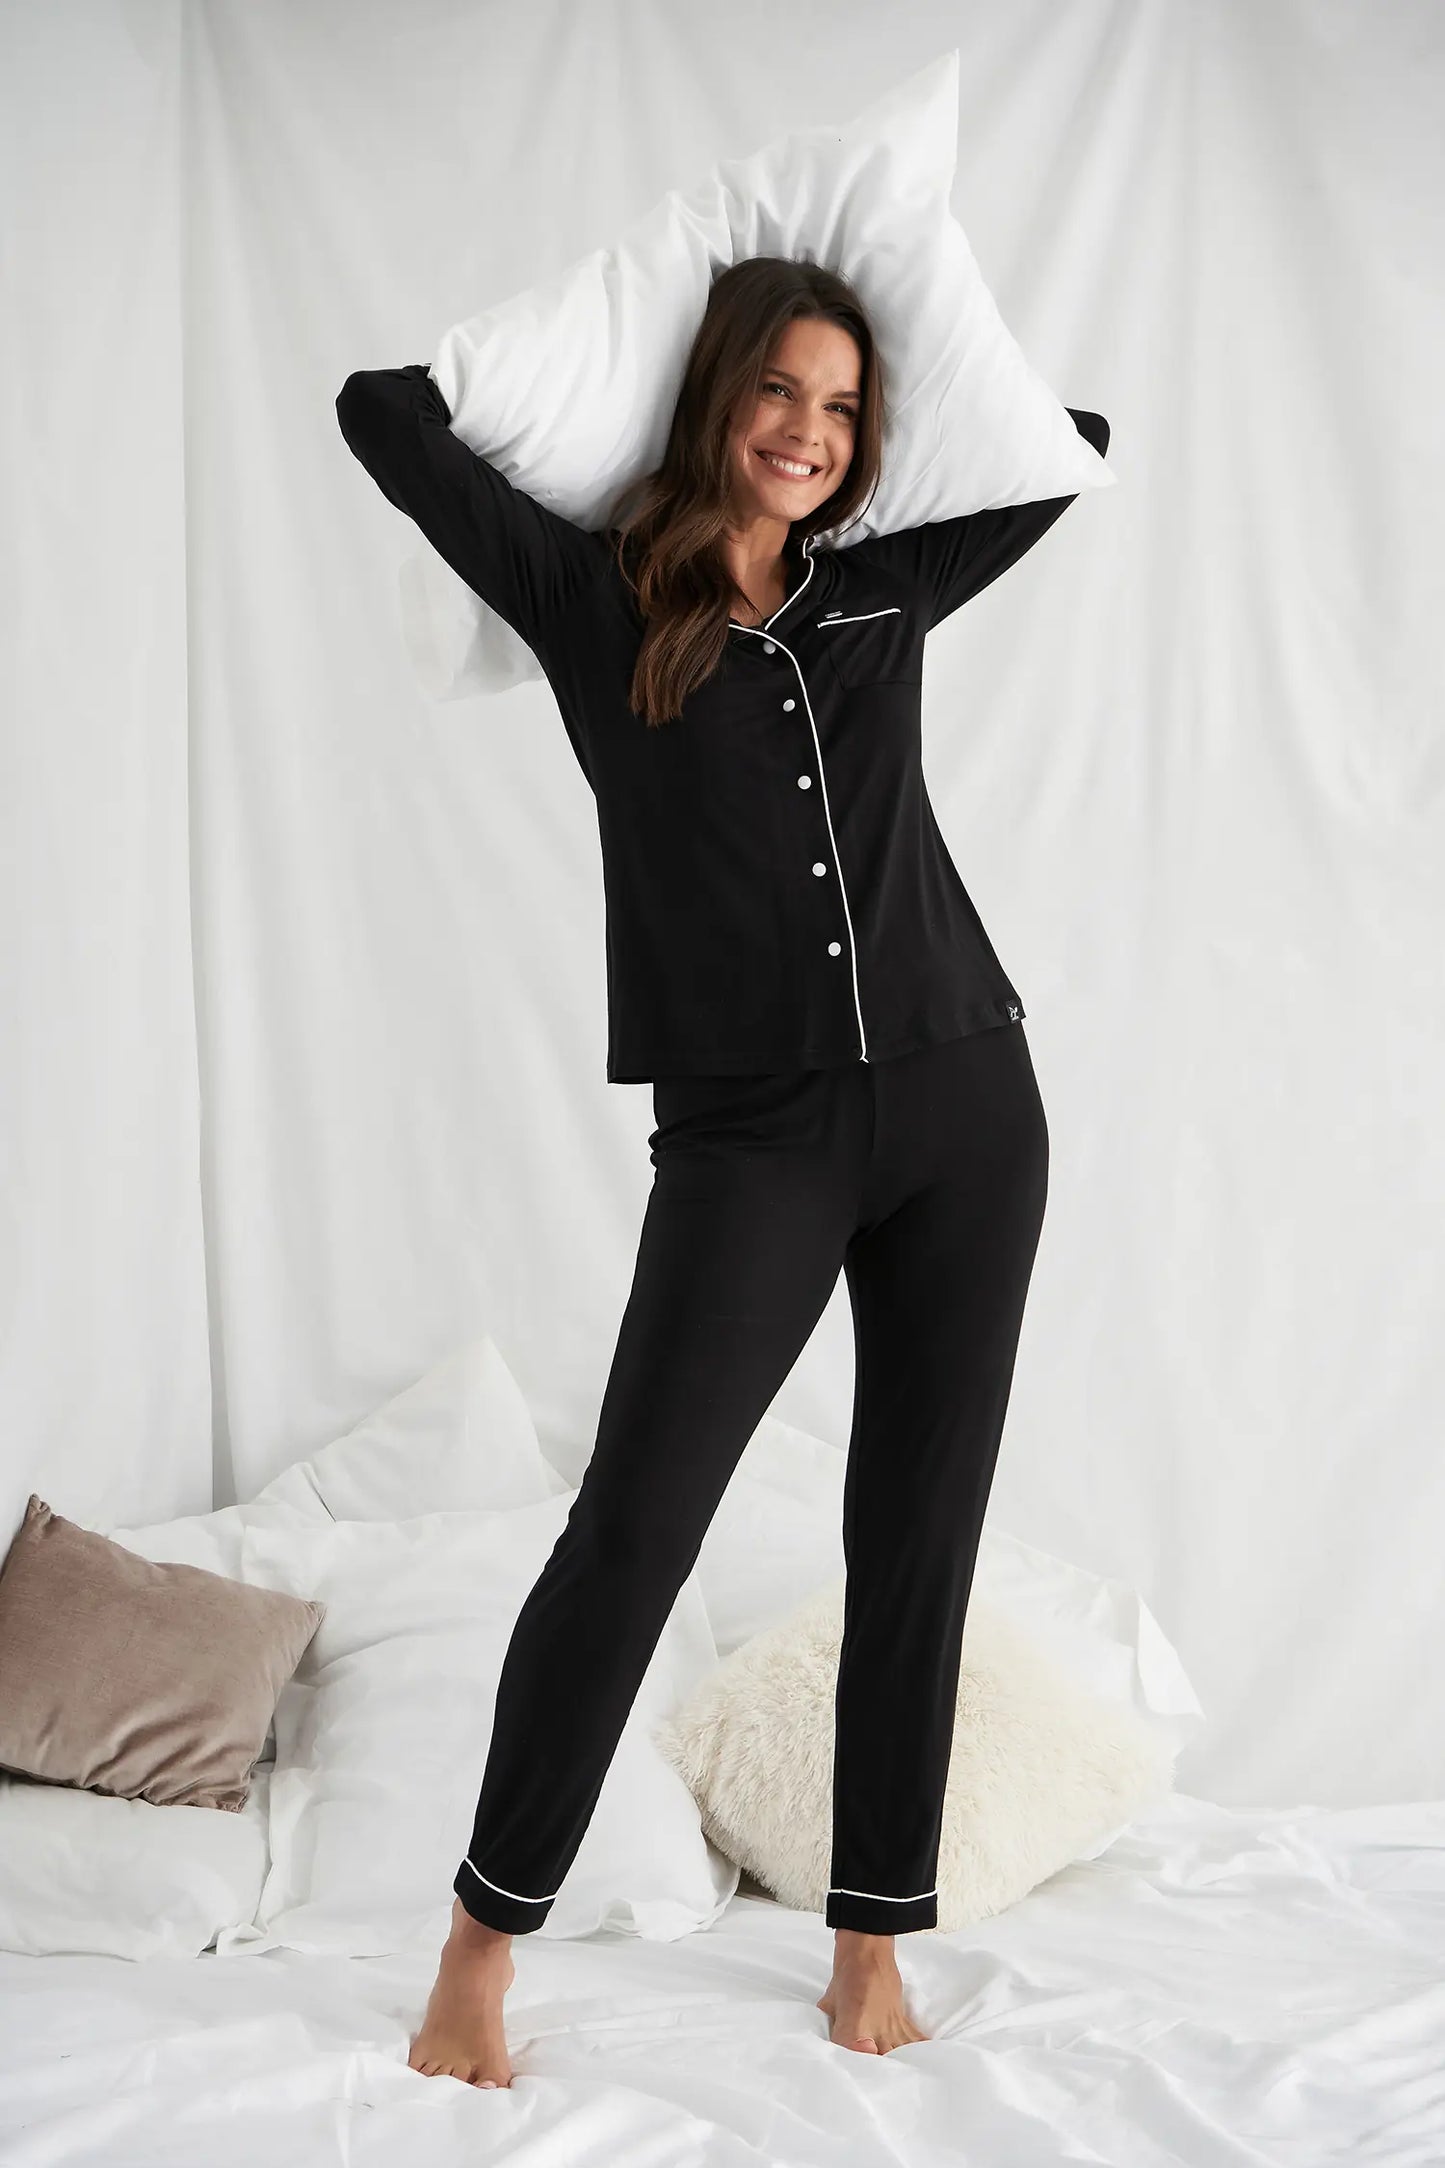 Women's Bamboo Long Pyjama Set in Black with revere collar and contrast colour piping from Pretty You London